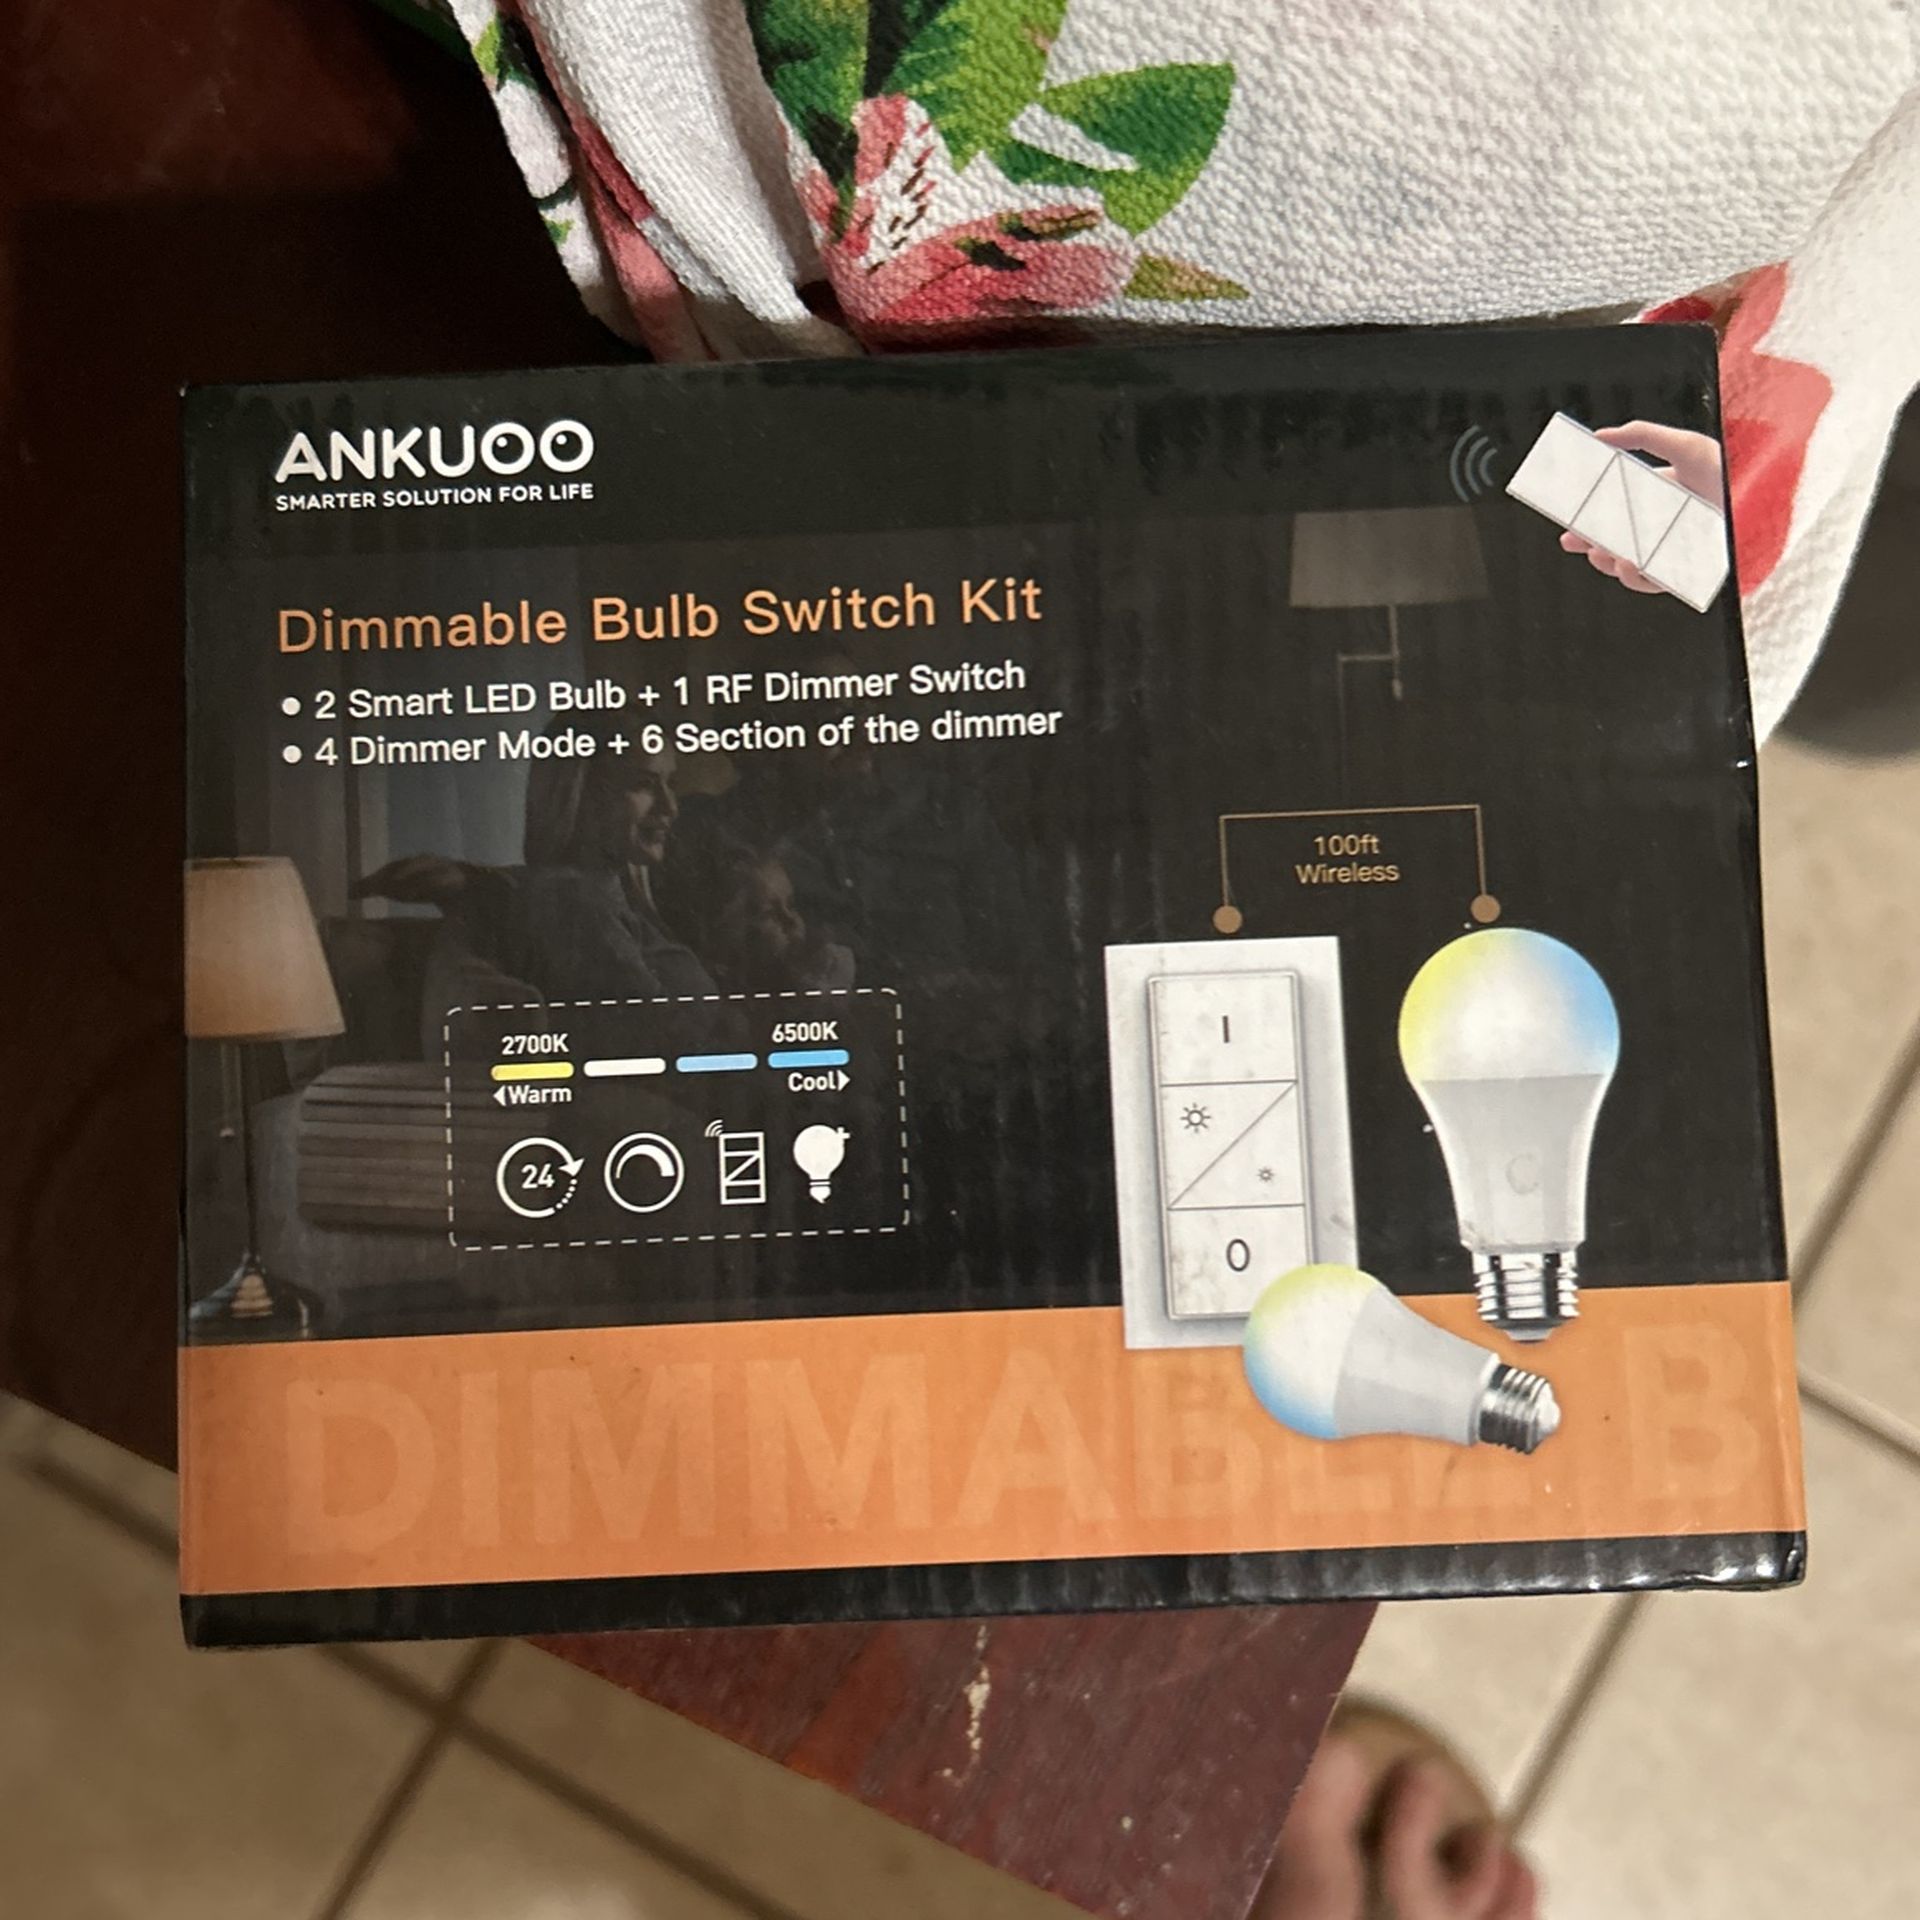 Ankuoo Dimmable Bulb Switch Kit